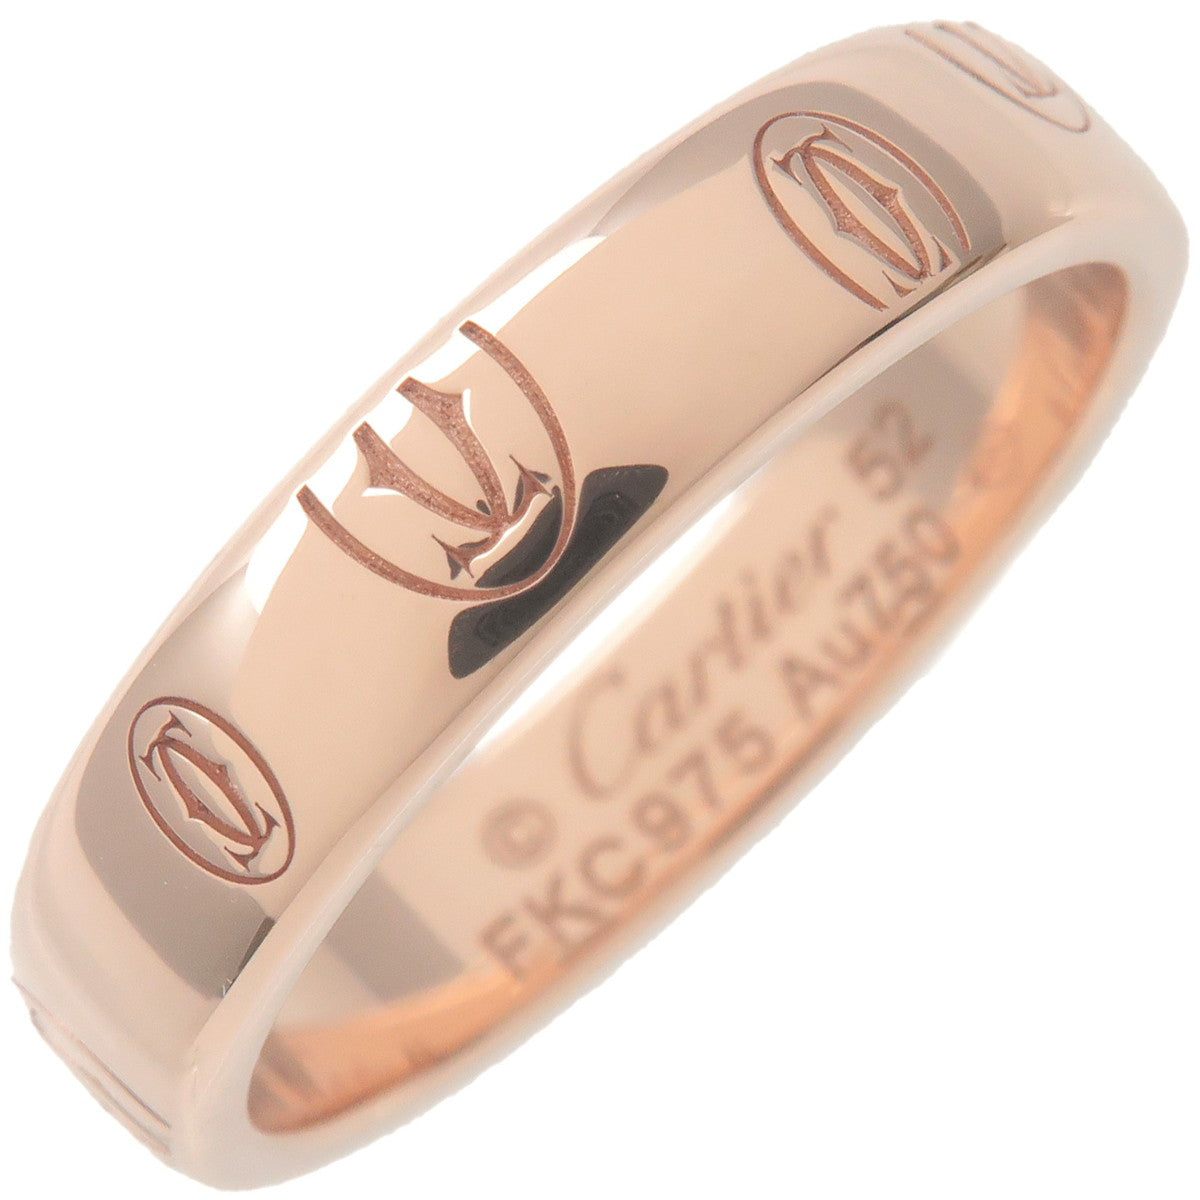 Cartier-Happy-Birth-Day-Ring-Rose-Gold-#52-US6-6.5-HK13-EU52